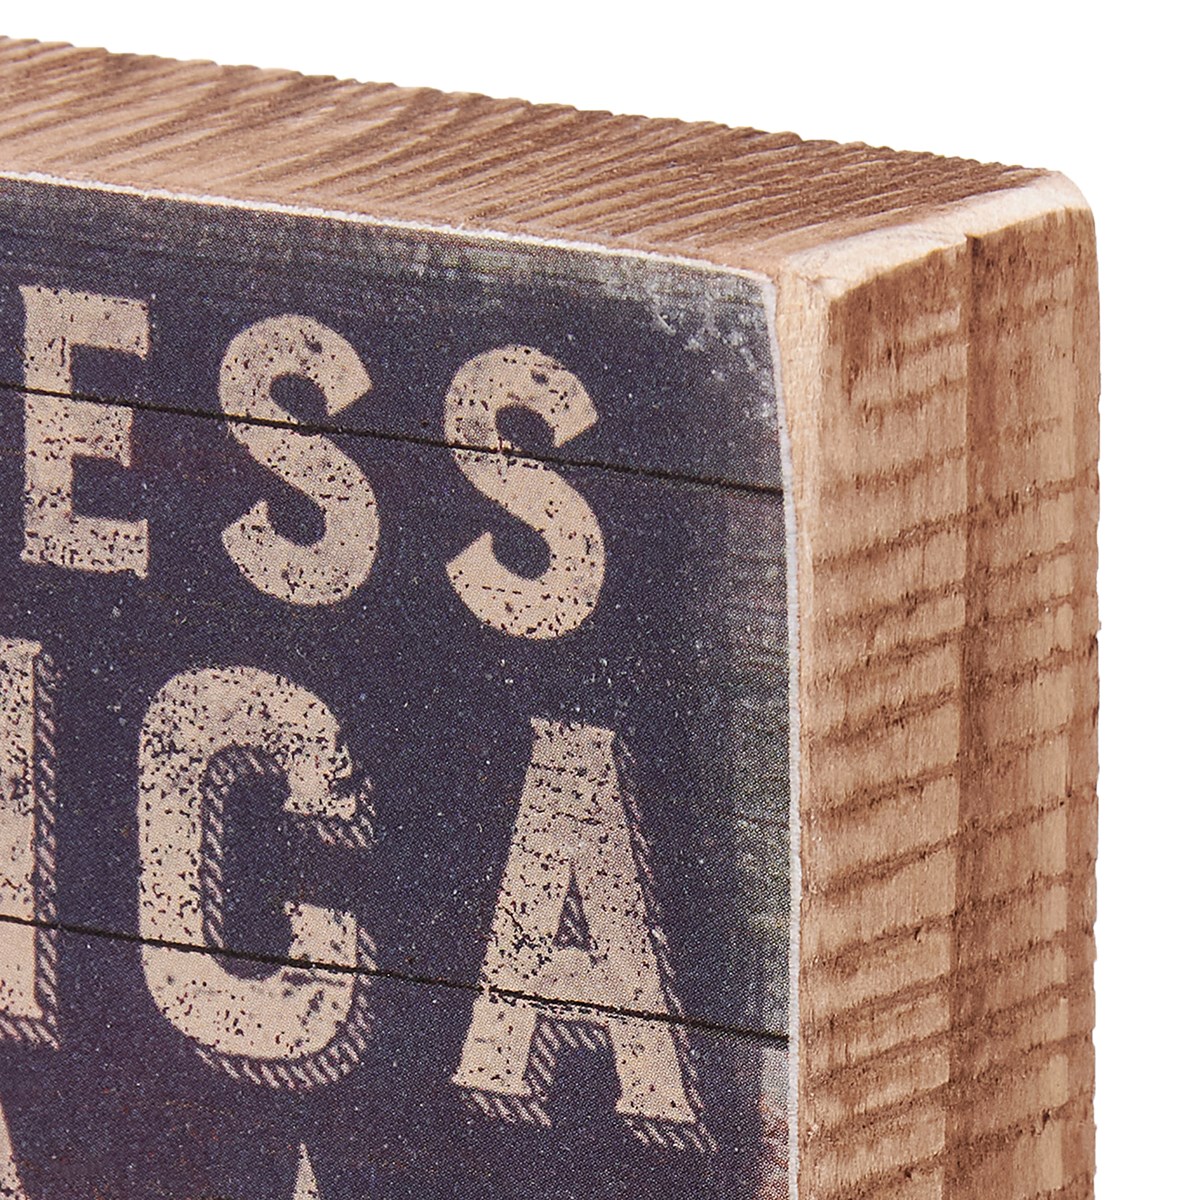 God Bless Home Sweet Home Block Sign - Wood, Paper